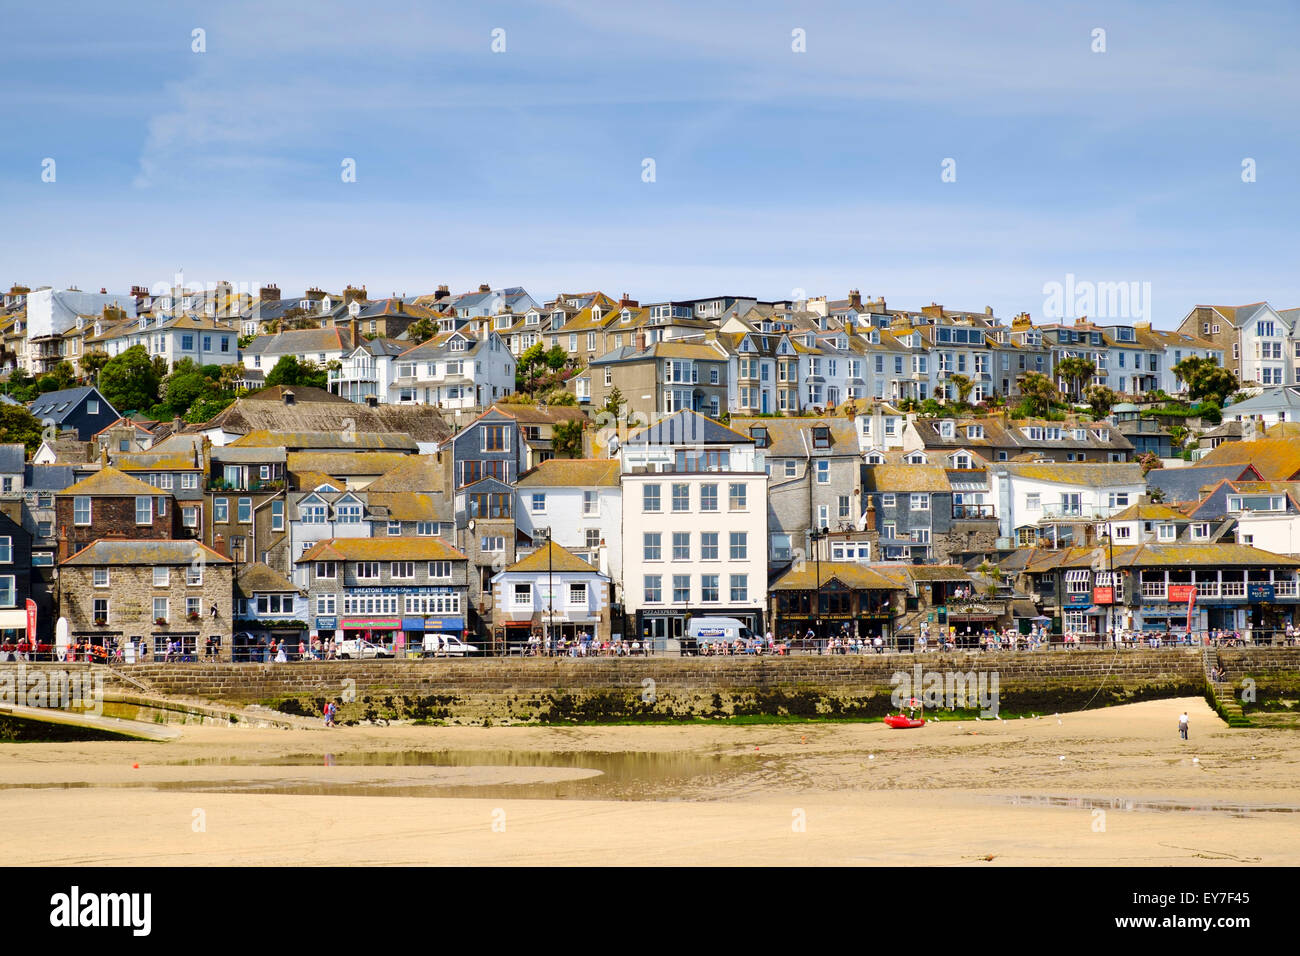 St Ives, Cornwall - Promenade and town houses in St Ives, UK in summer Stock Photo